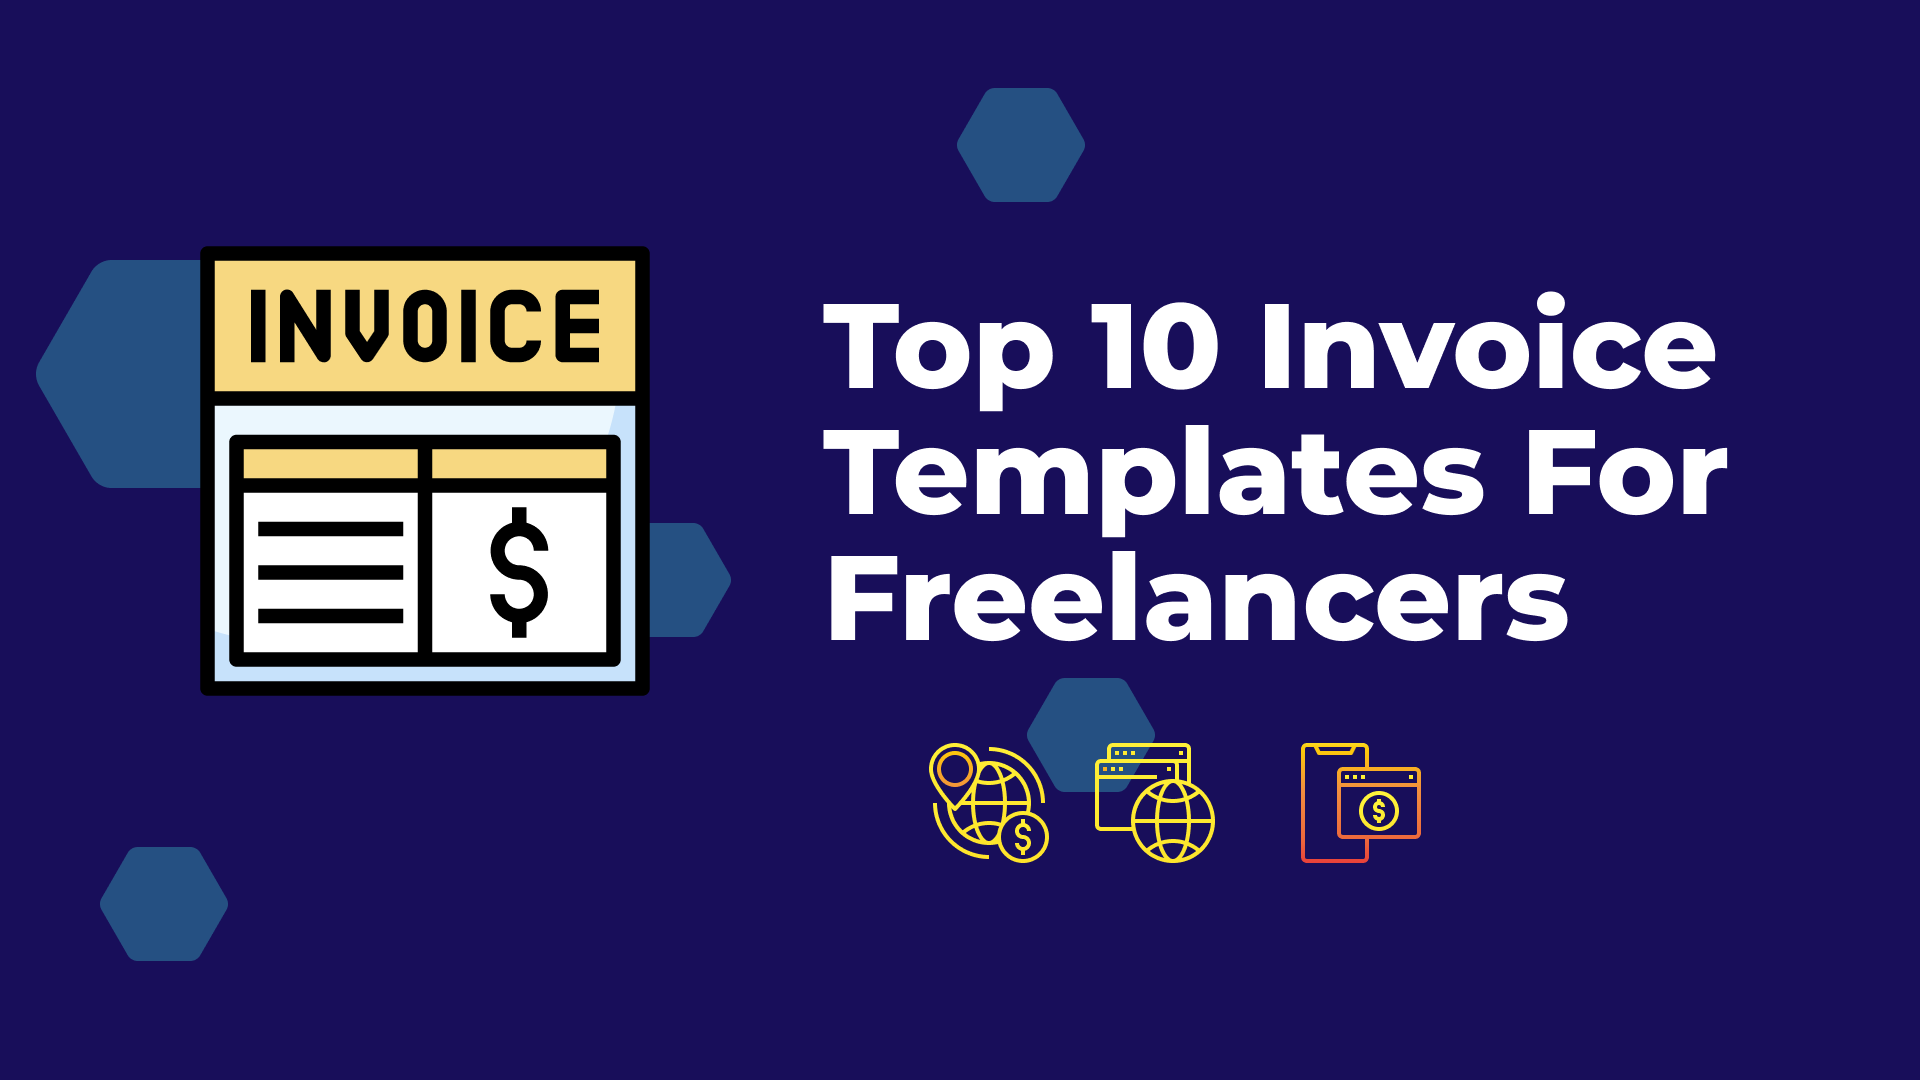 Top 10 Invoice Templates For Freelancers Free Blank Page